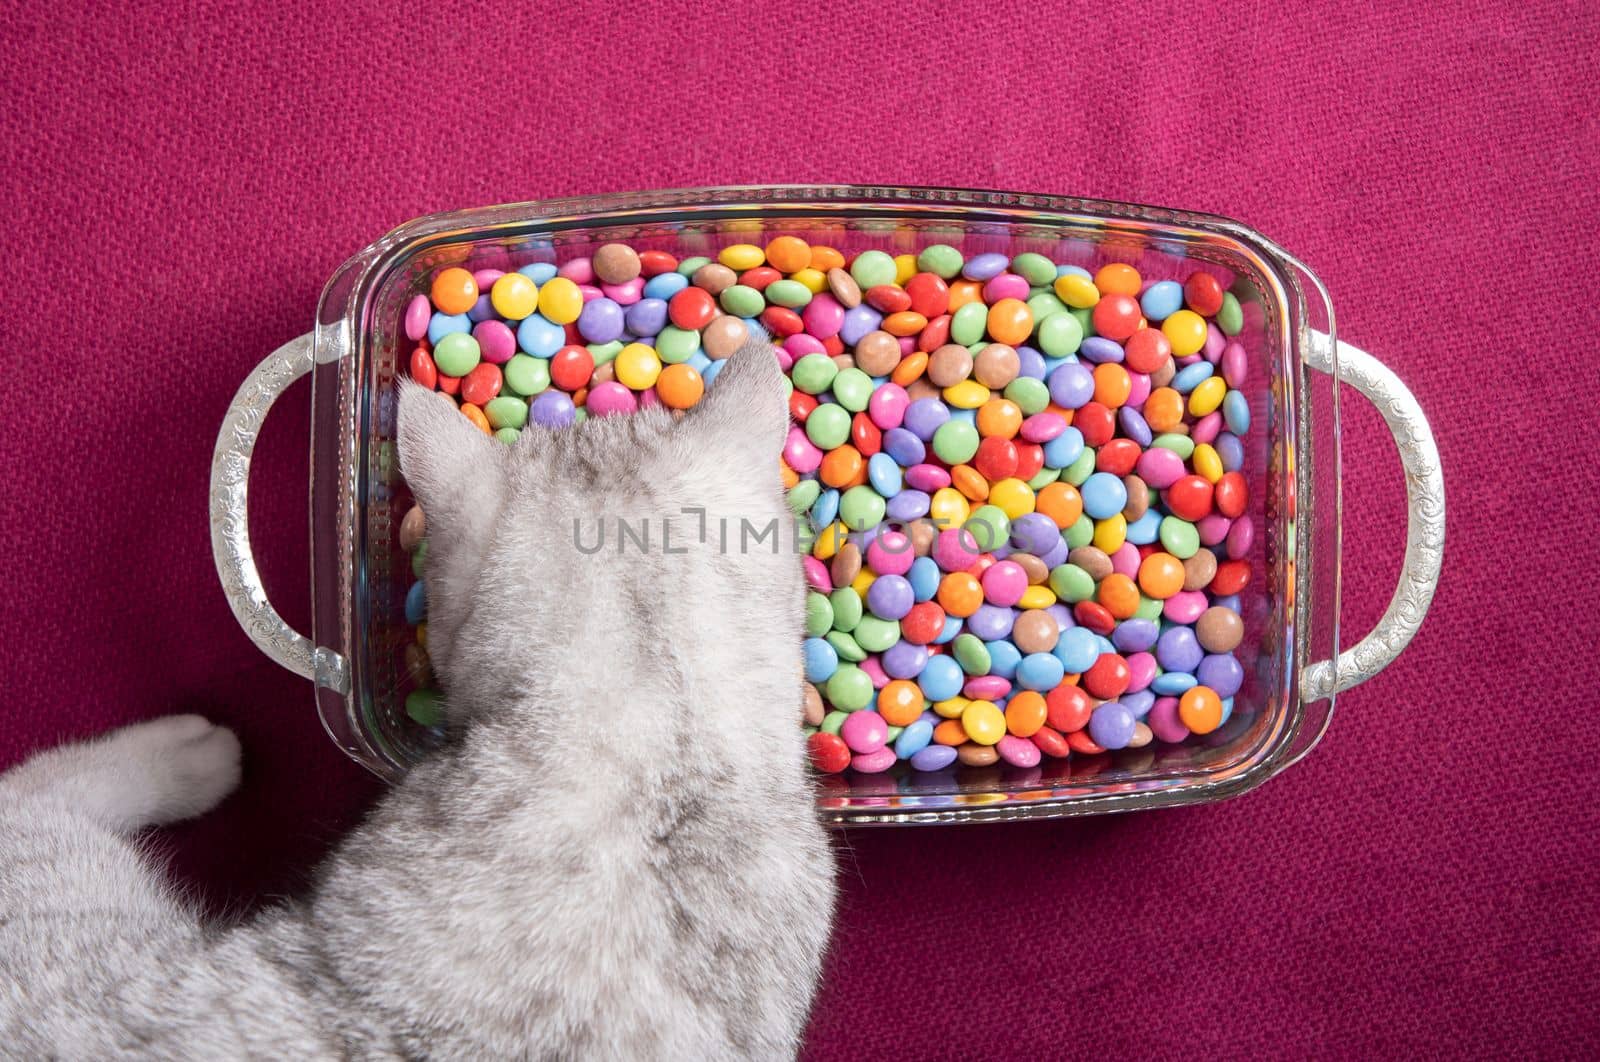 curious kitten looks at multi-colored round candies, bright and colorful by KaterinaDalemans